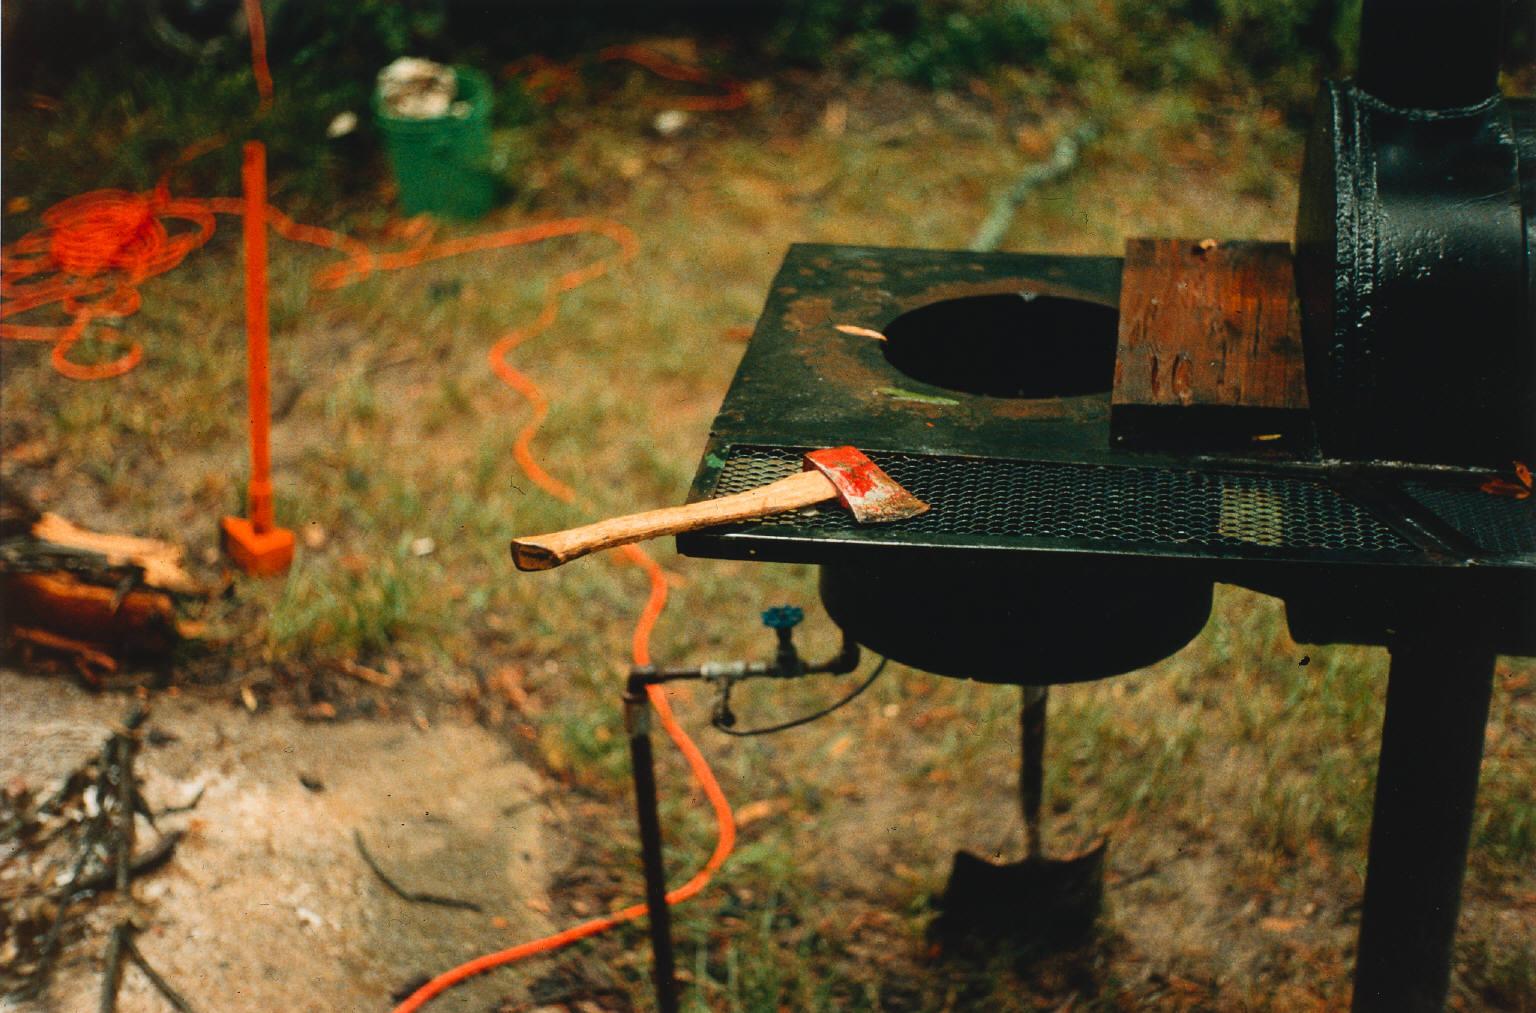 eggleston-1983-1986-s-TheDemocraticForest-axe